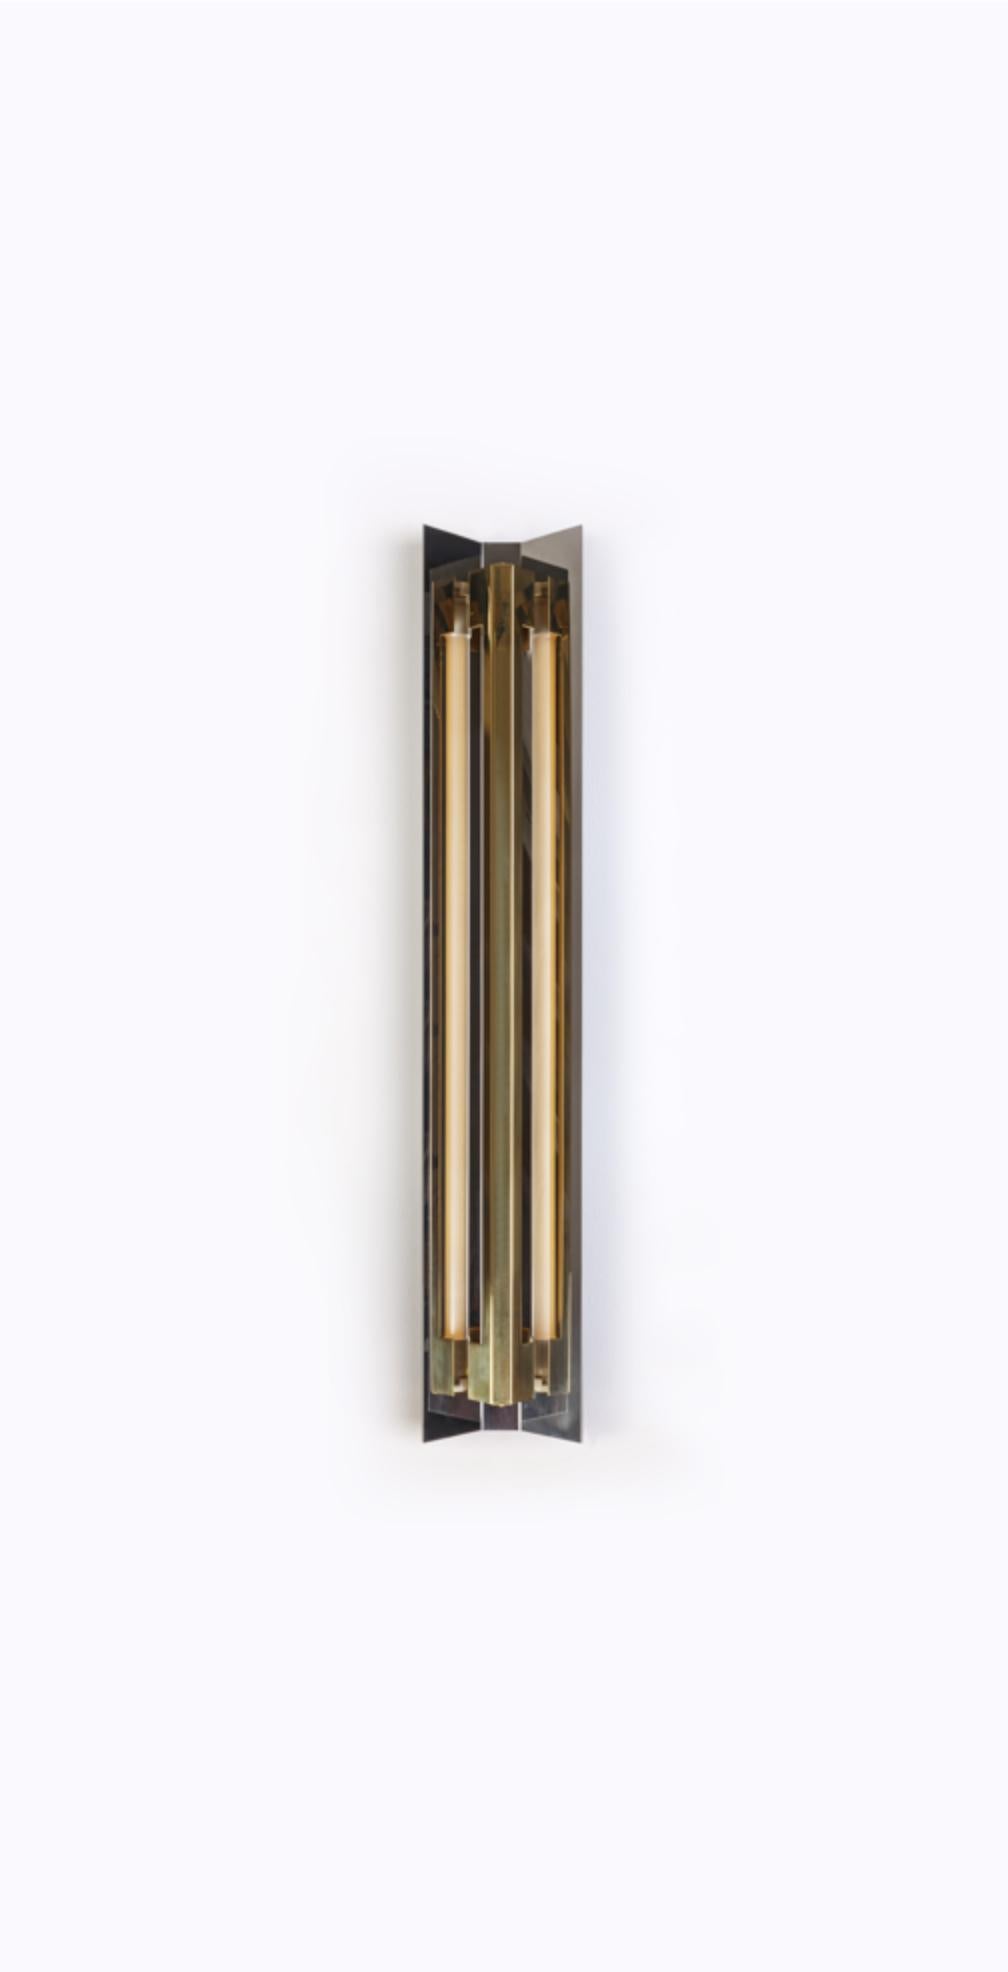 Small Misalliance solid brass wall light by Lexavala.
Dimensions: D 16 x W 70 x H 8 cm
Materials: Brass.

There are two lenghts of socket covers, extending over the LED. Two short are to be found in Suspended and Surface, and one long in the